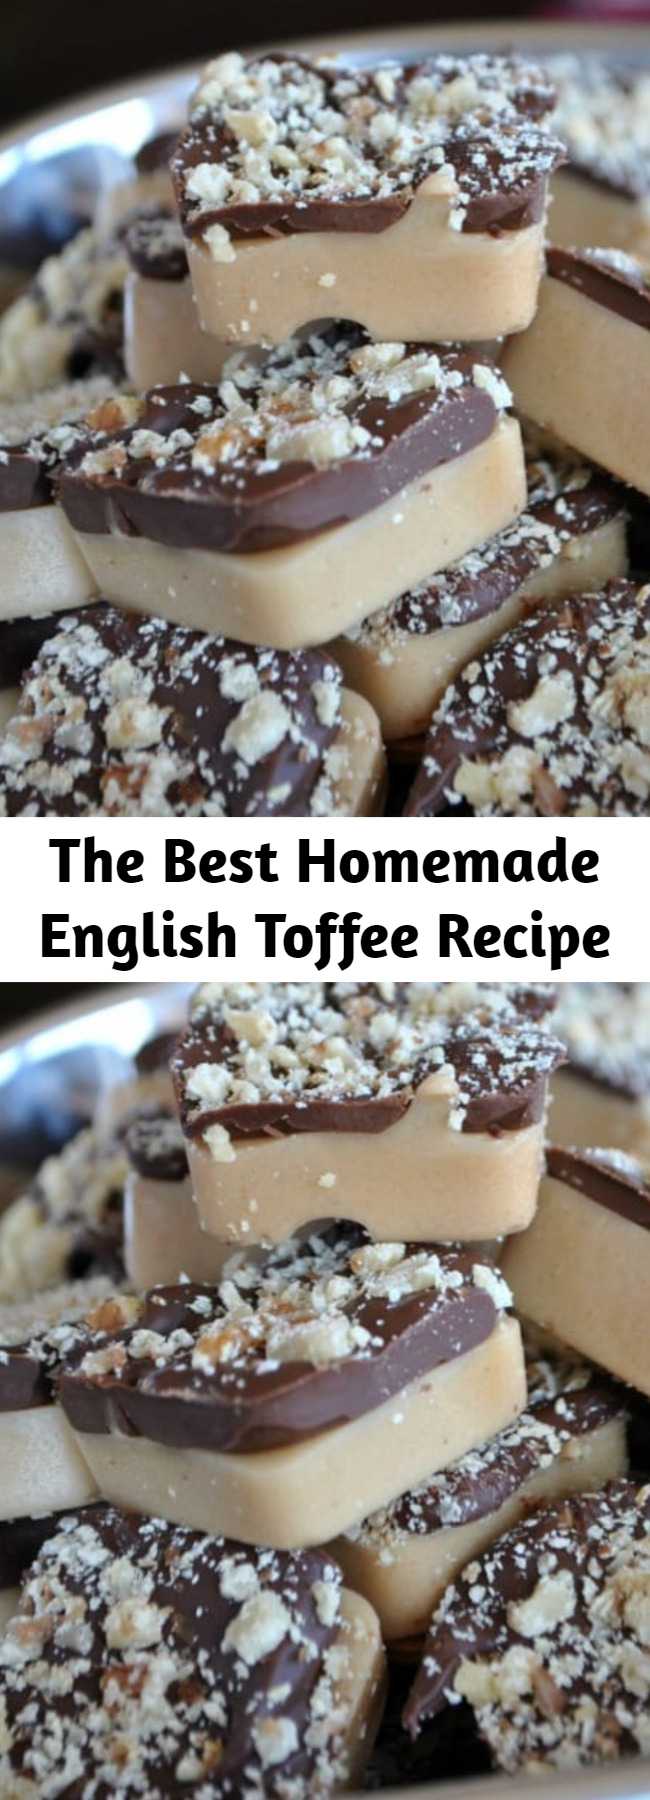 The Best Homemade English Toffee Recipe - English Toffee is a classic holiday candy: buttery candy poured over almonds, topped with milk chocolate and walnuts. Make it in a brownie bite pan to get the cutest toffee bites – perfect for gifting!